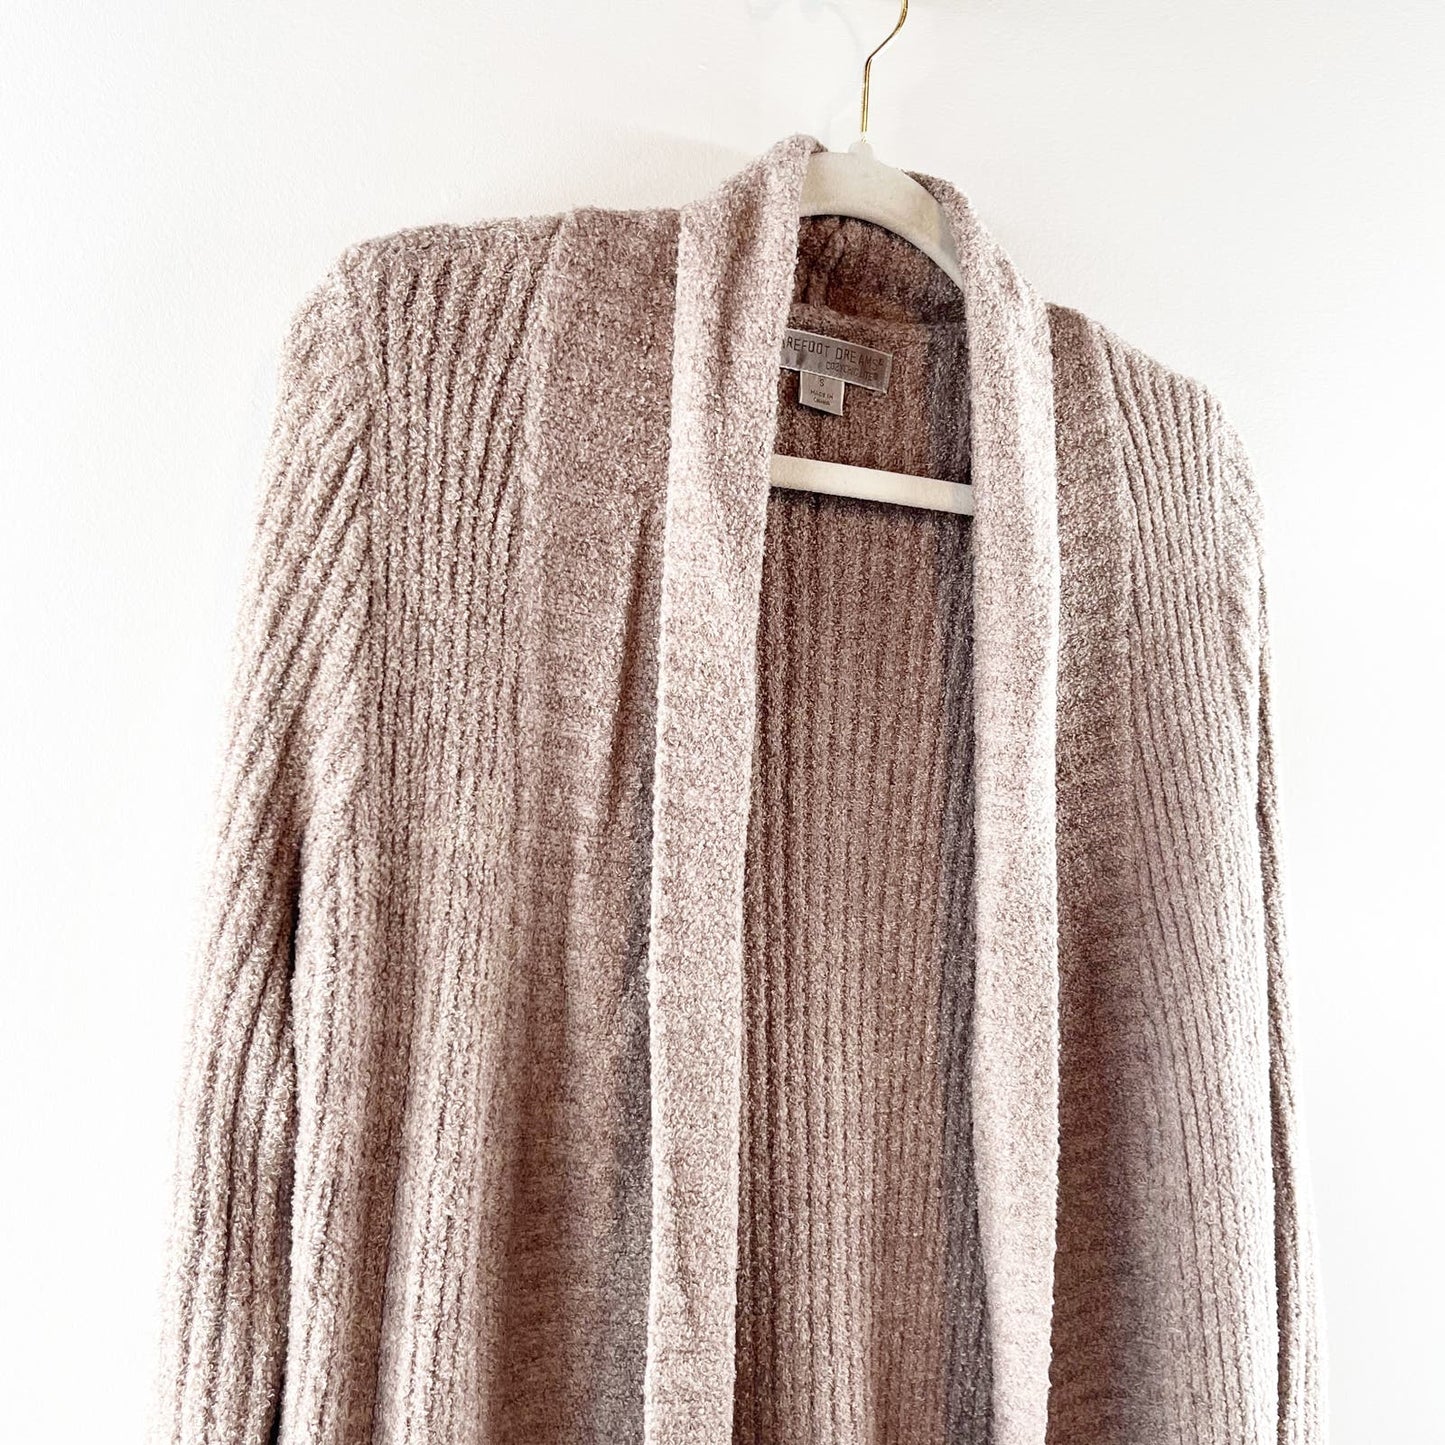 Barefoot Dreams Cozy Chic Lite Montecito Duster Cardigan Sweater Brown Small